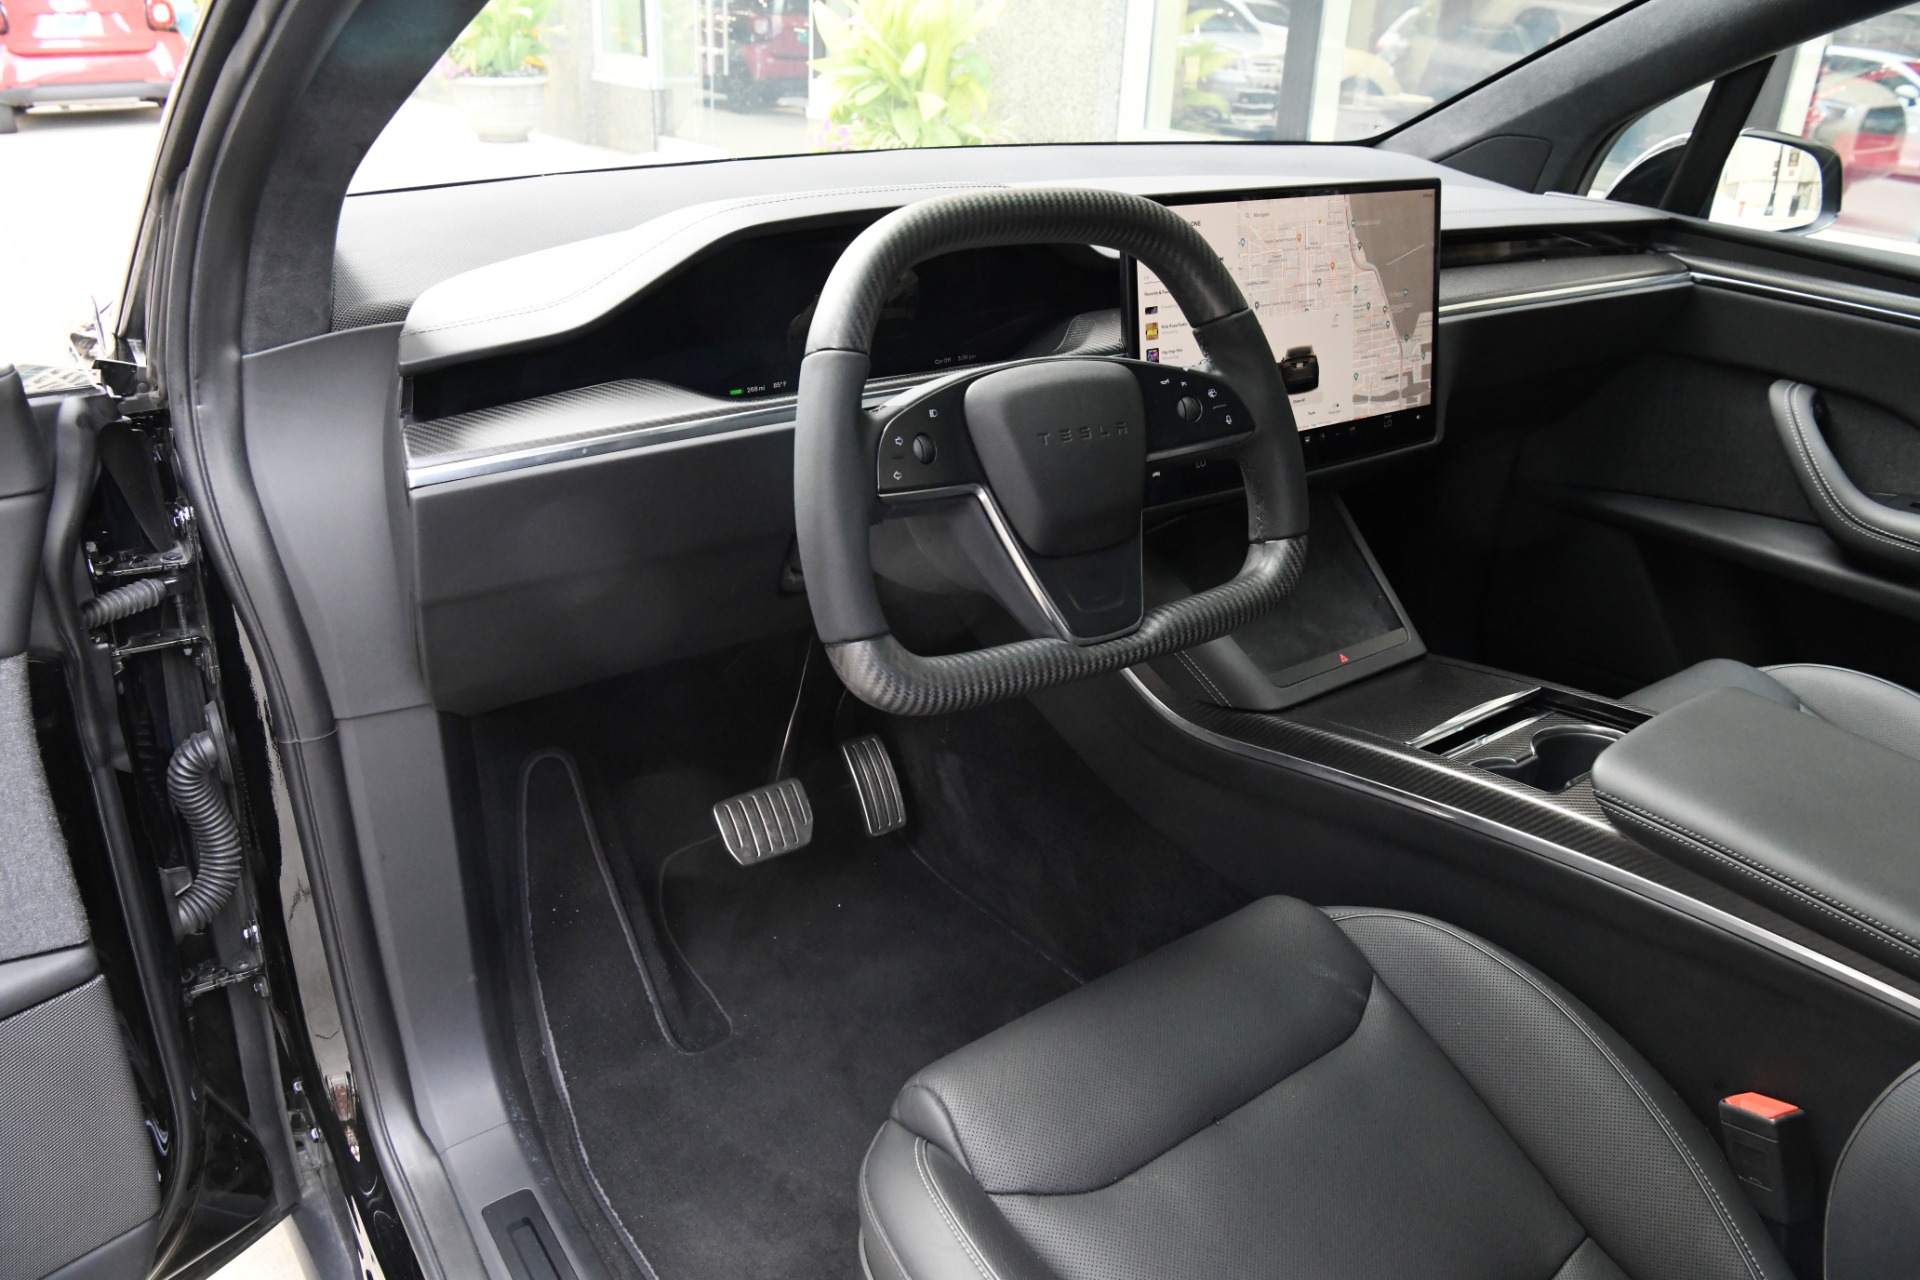 A custom Tesla Model X with a Bentley's interior goes on sale for